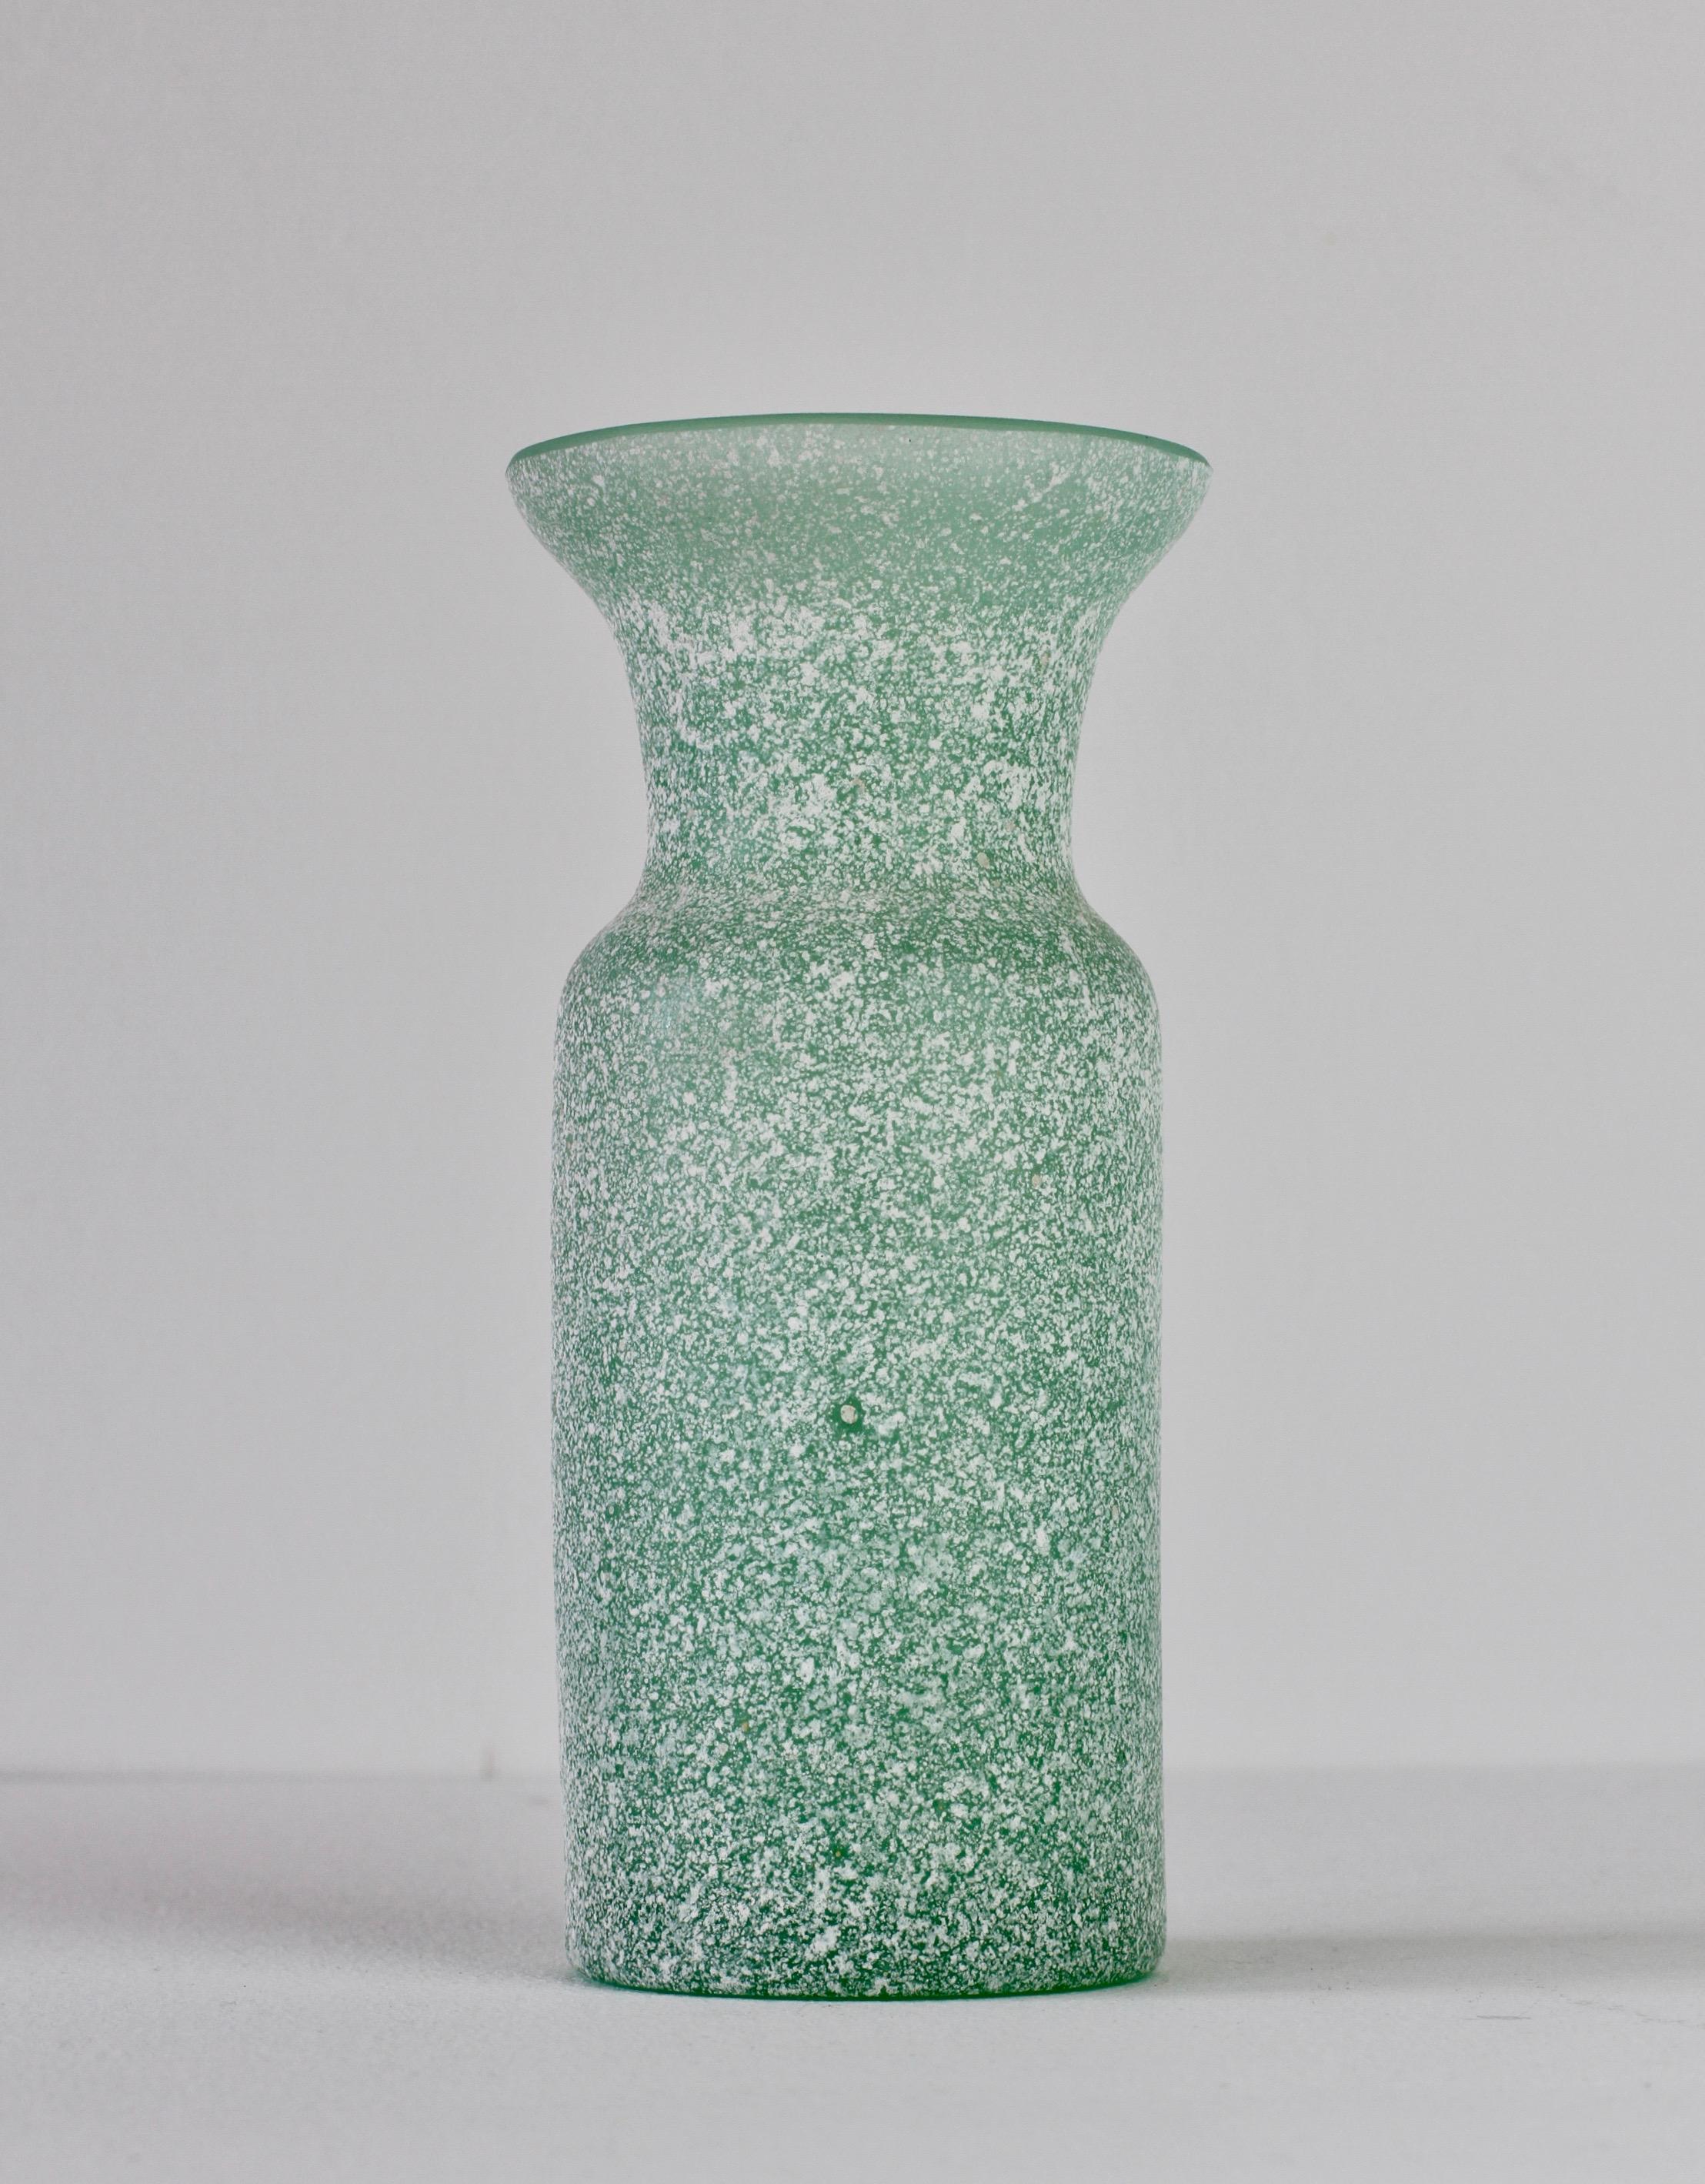 Beautiful 'a Scavo' green colored / coloured glass vase or vessel by Seguso Vetri d'Arte Murano, Italy. Elegant in form and showing wonderful craftsmanship with the use of the 'Scavo' technique to replicate to look and feel of ancient Roman